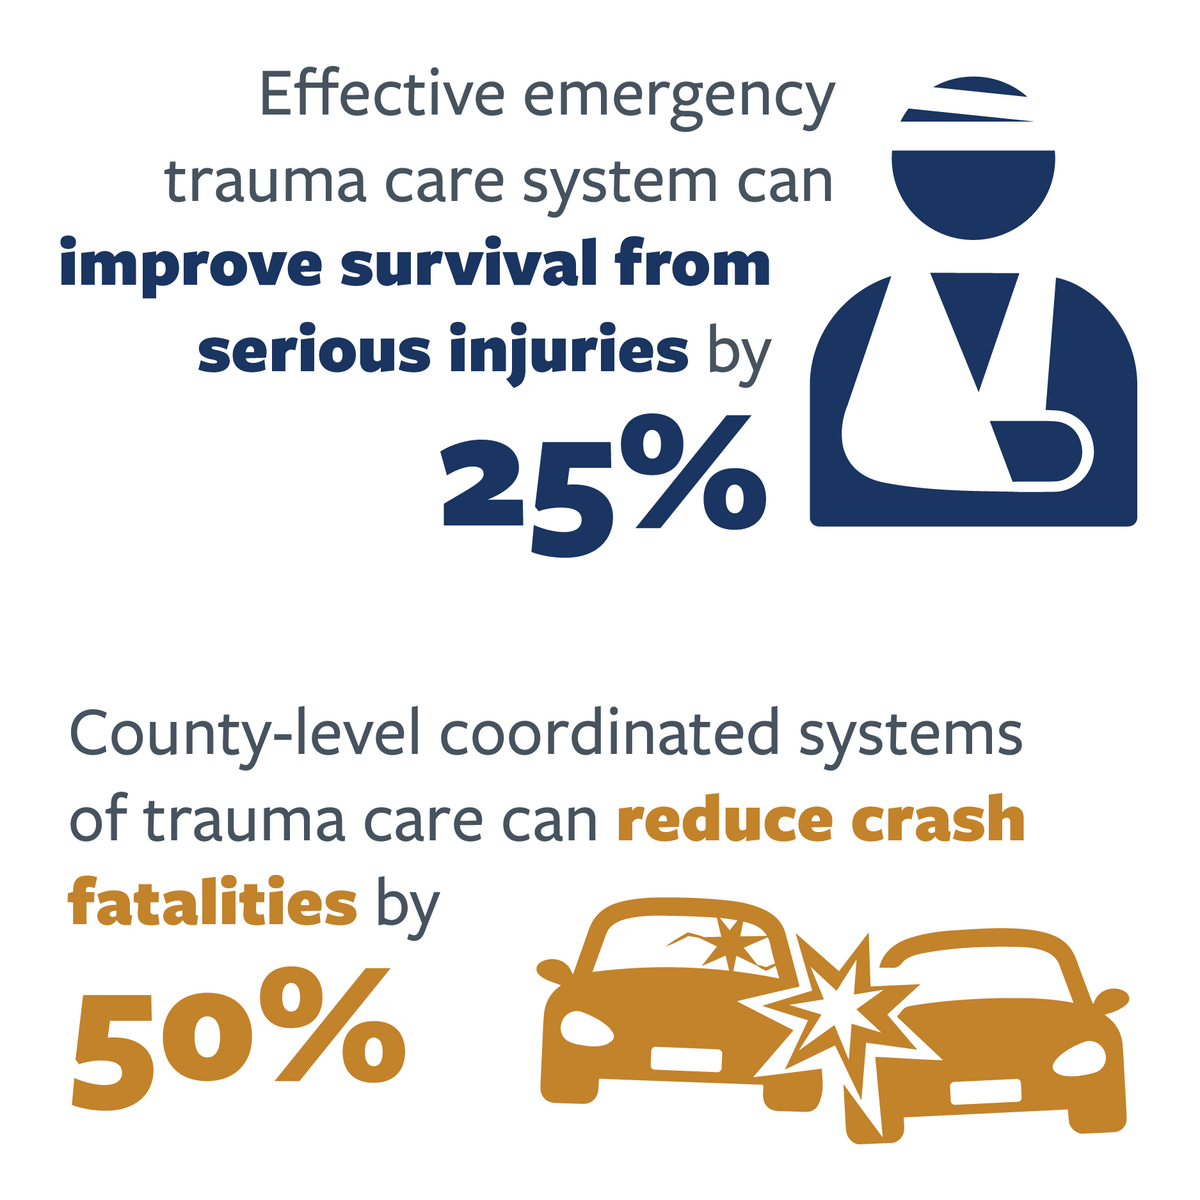 nfographic detailing improval in serious injury outcomes and reduction in fatalities through effective trauma care systems. For more information, see the following summary. 